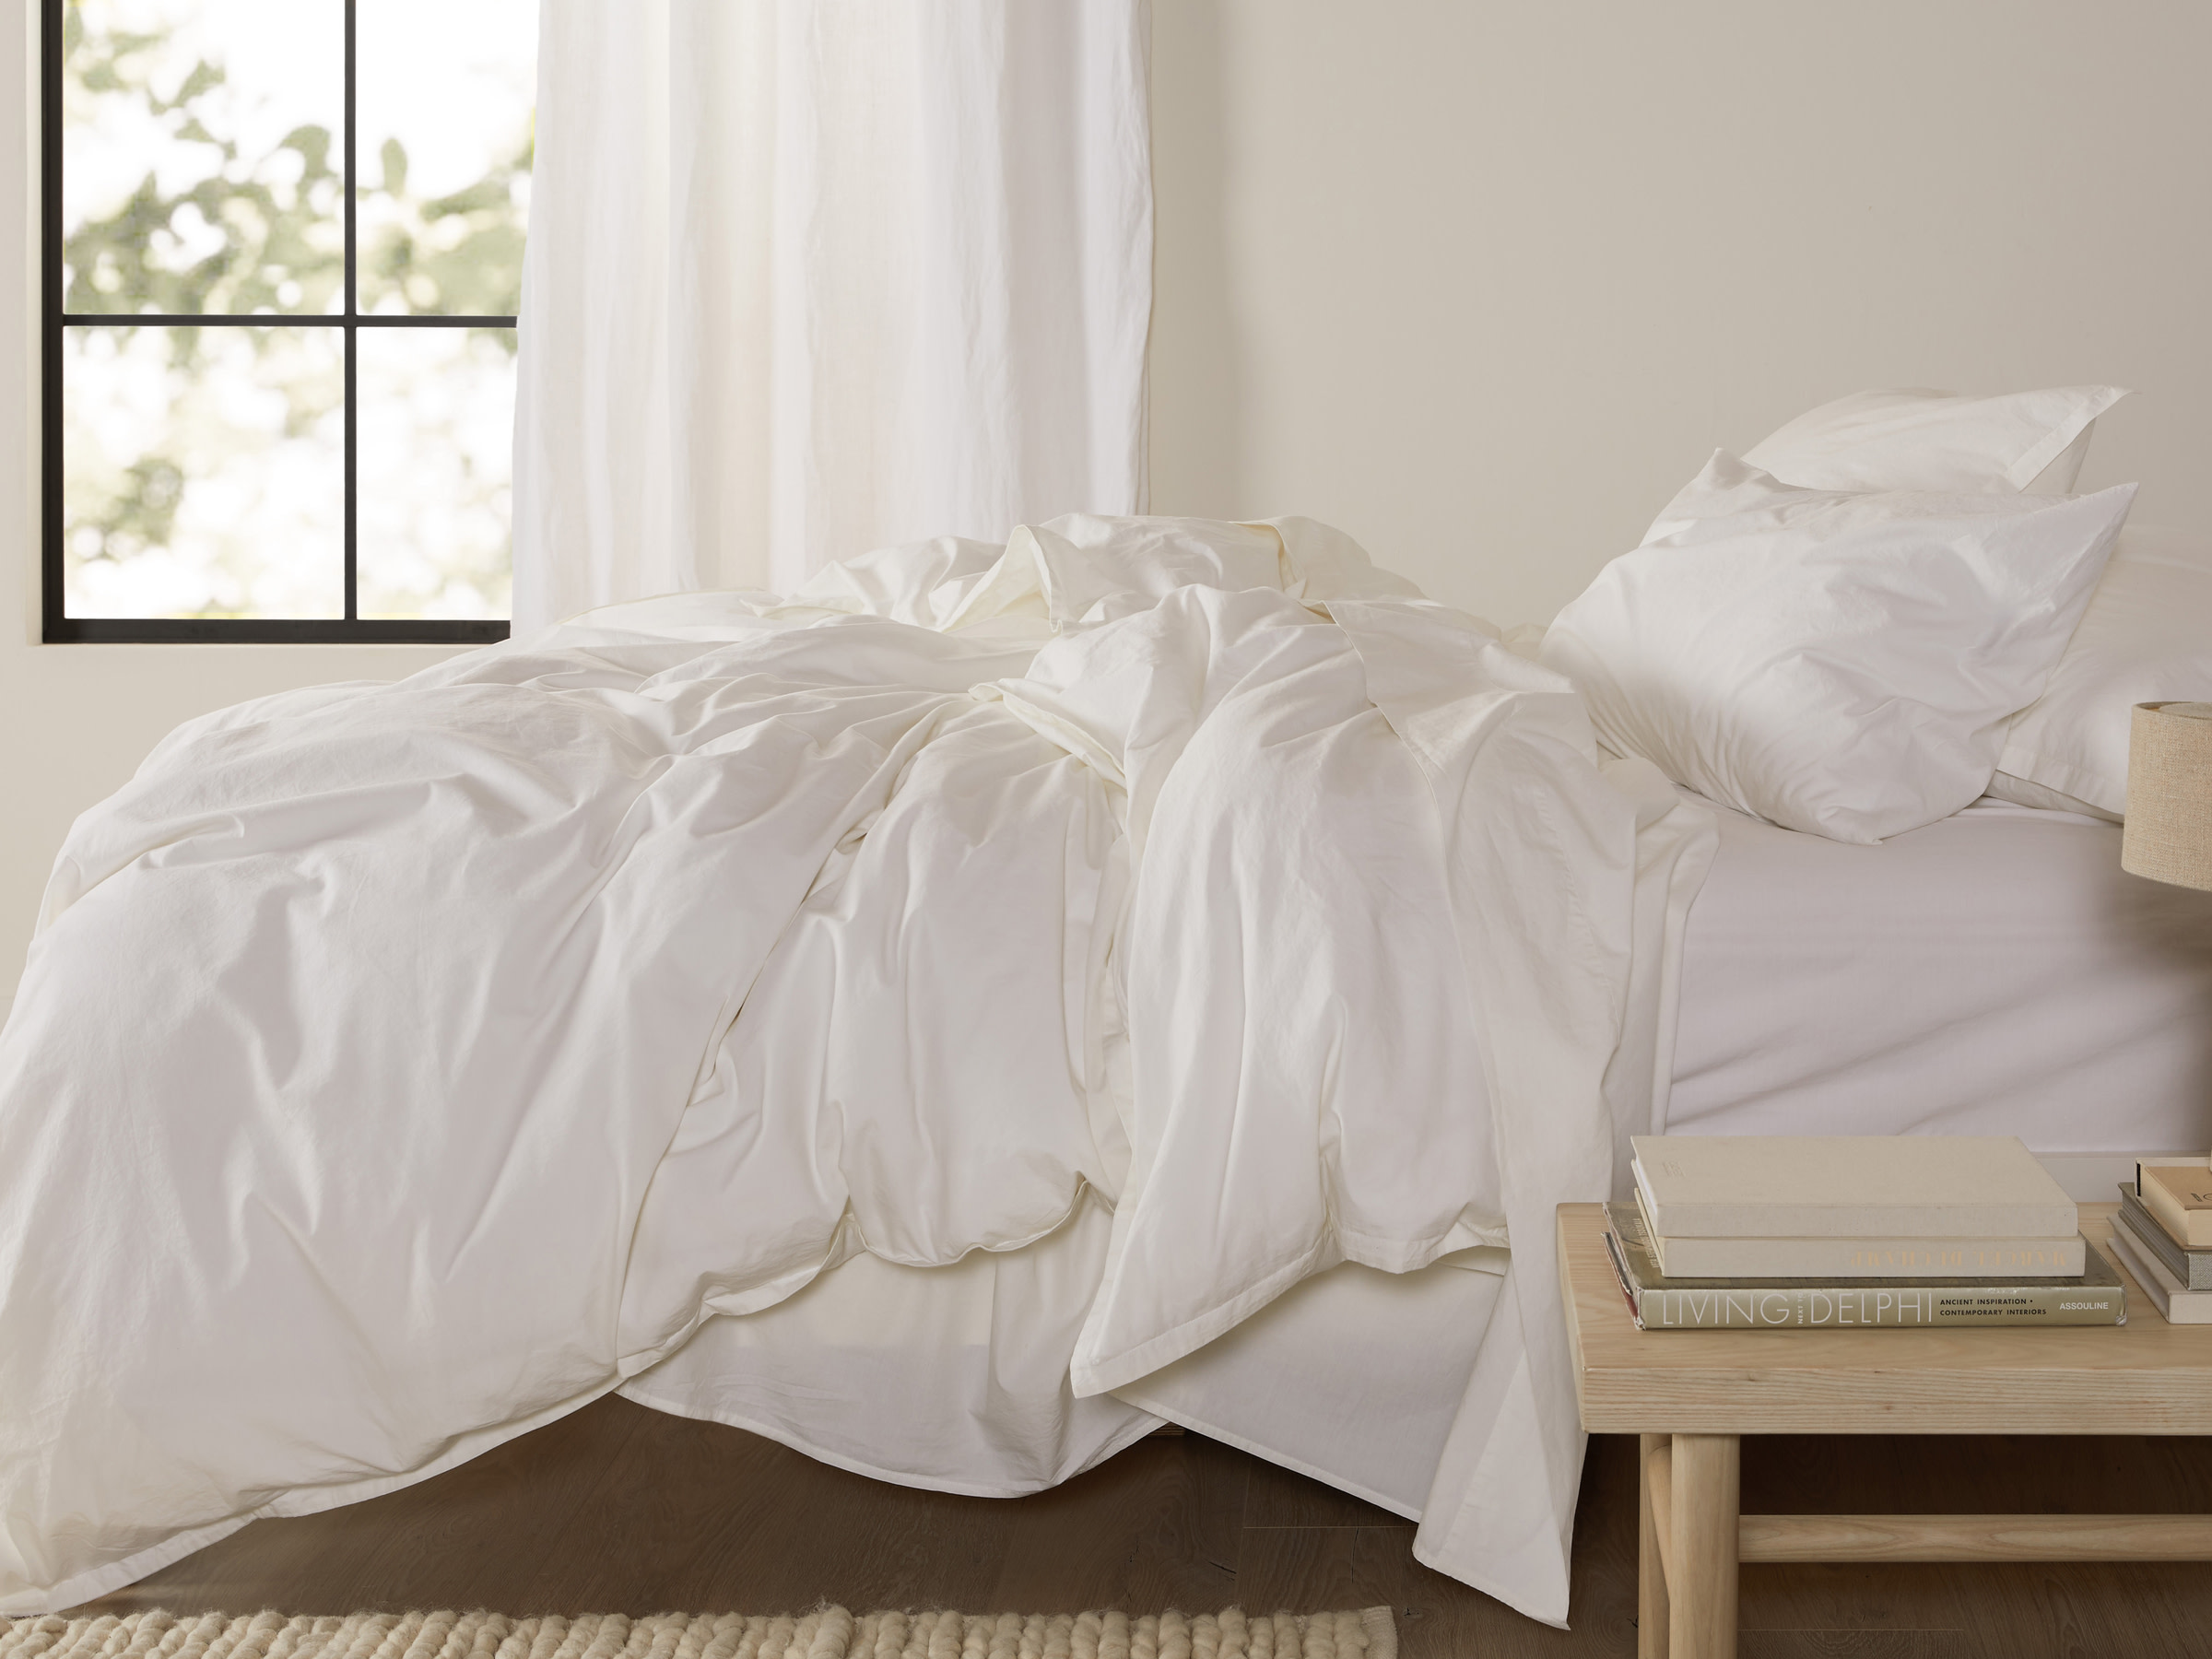 Cream Percale Duvet Cover Shown In A Room